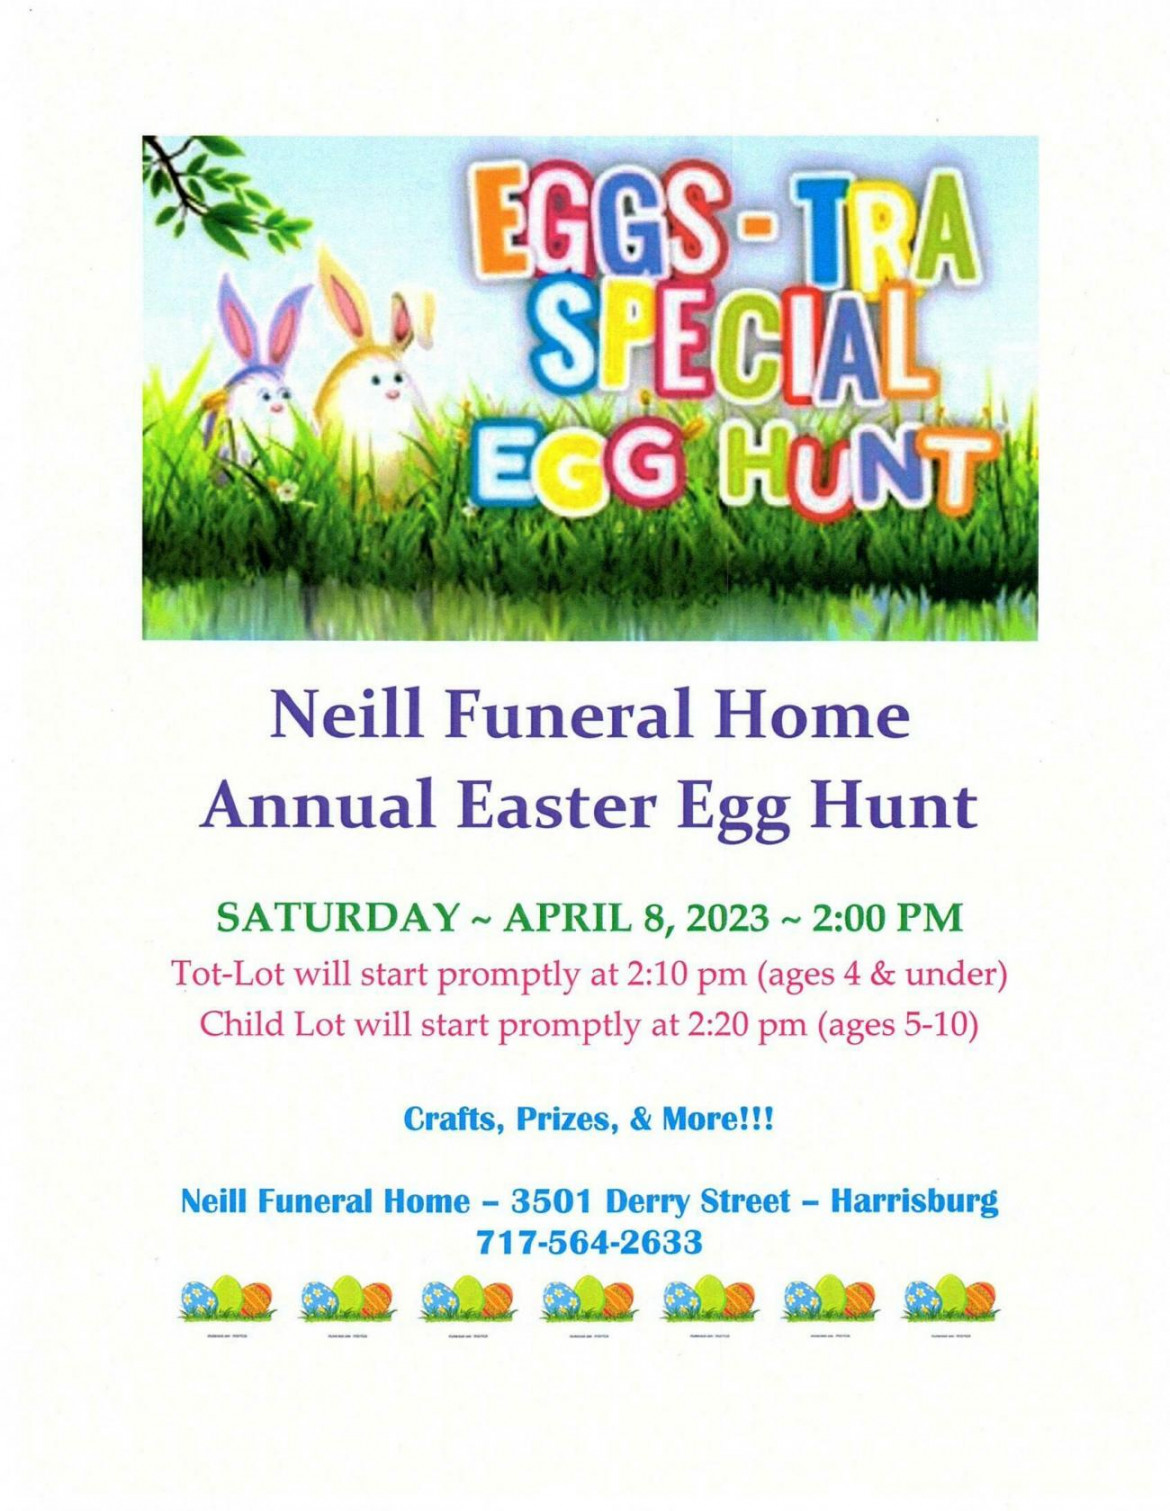 Neill Funeral Home Annual Easter Egg Hunt